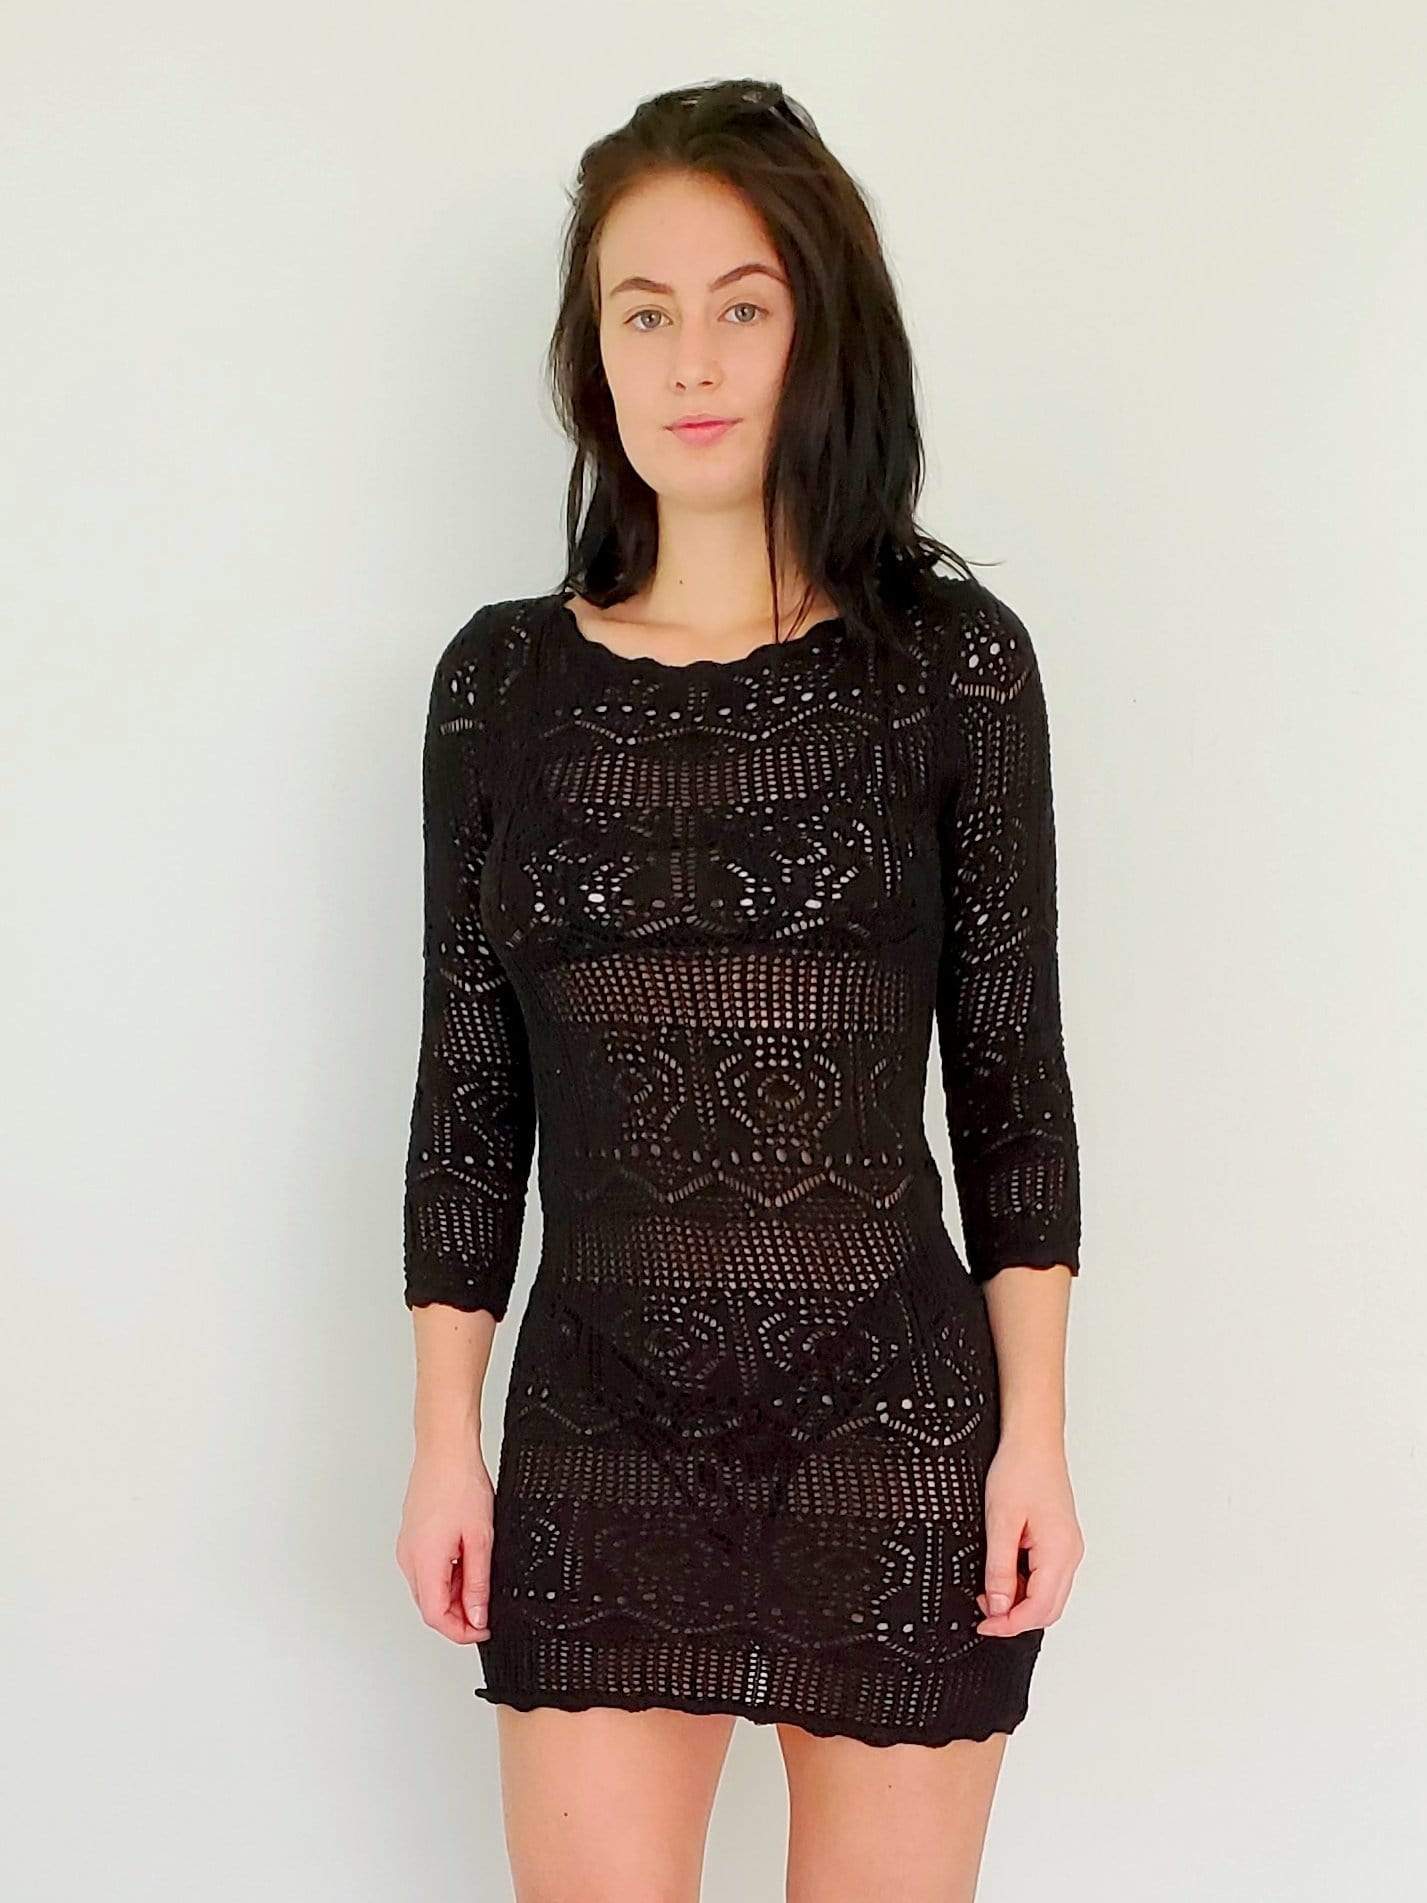 Mapale Apparel & Accessories > Clothing > Dresses Small / Black Bebe Black Crochet Beach Dress Cover Up Bebe Black Crochet Scoop Neck Beach Resort Party Club Dress Cover Up